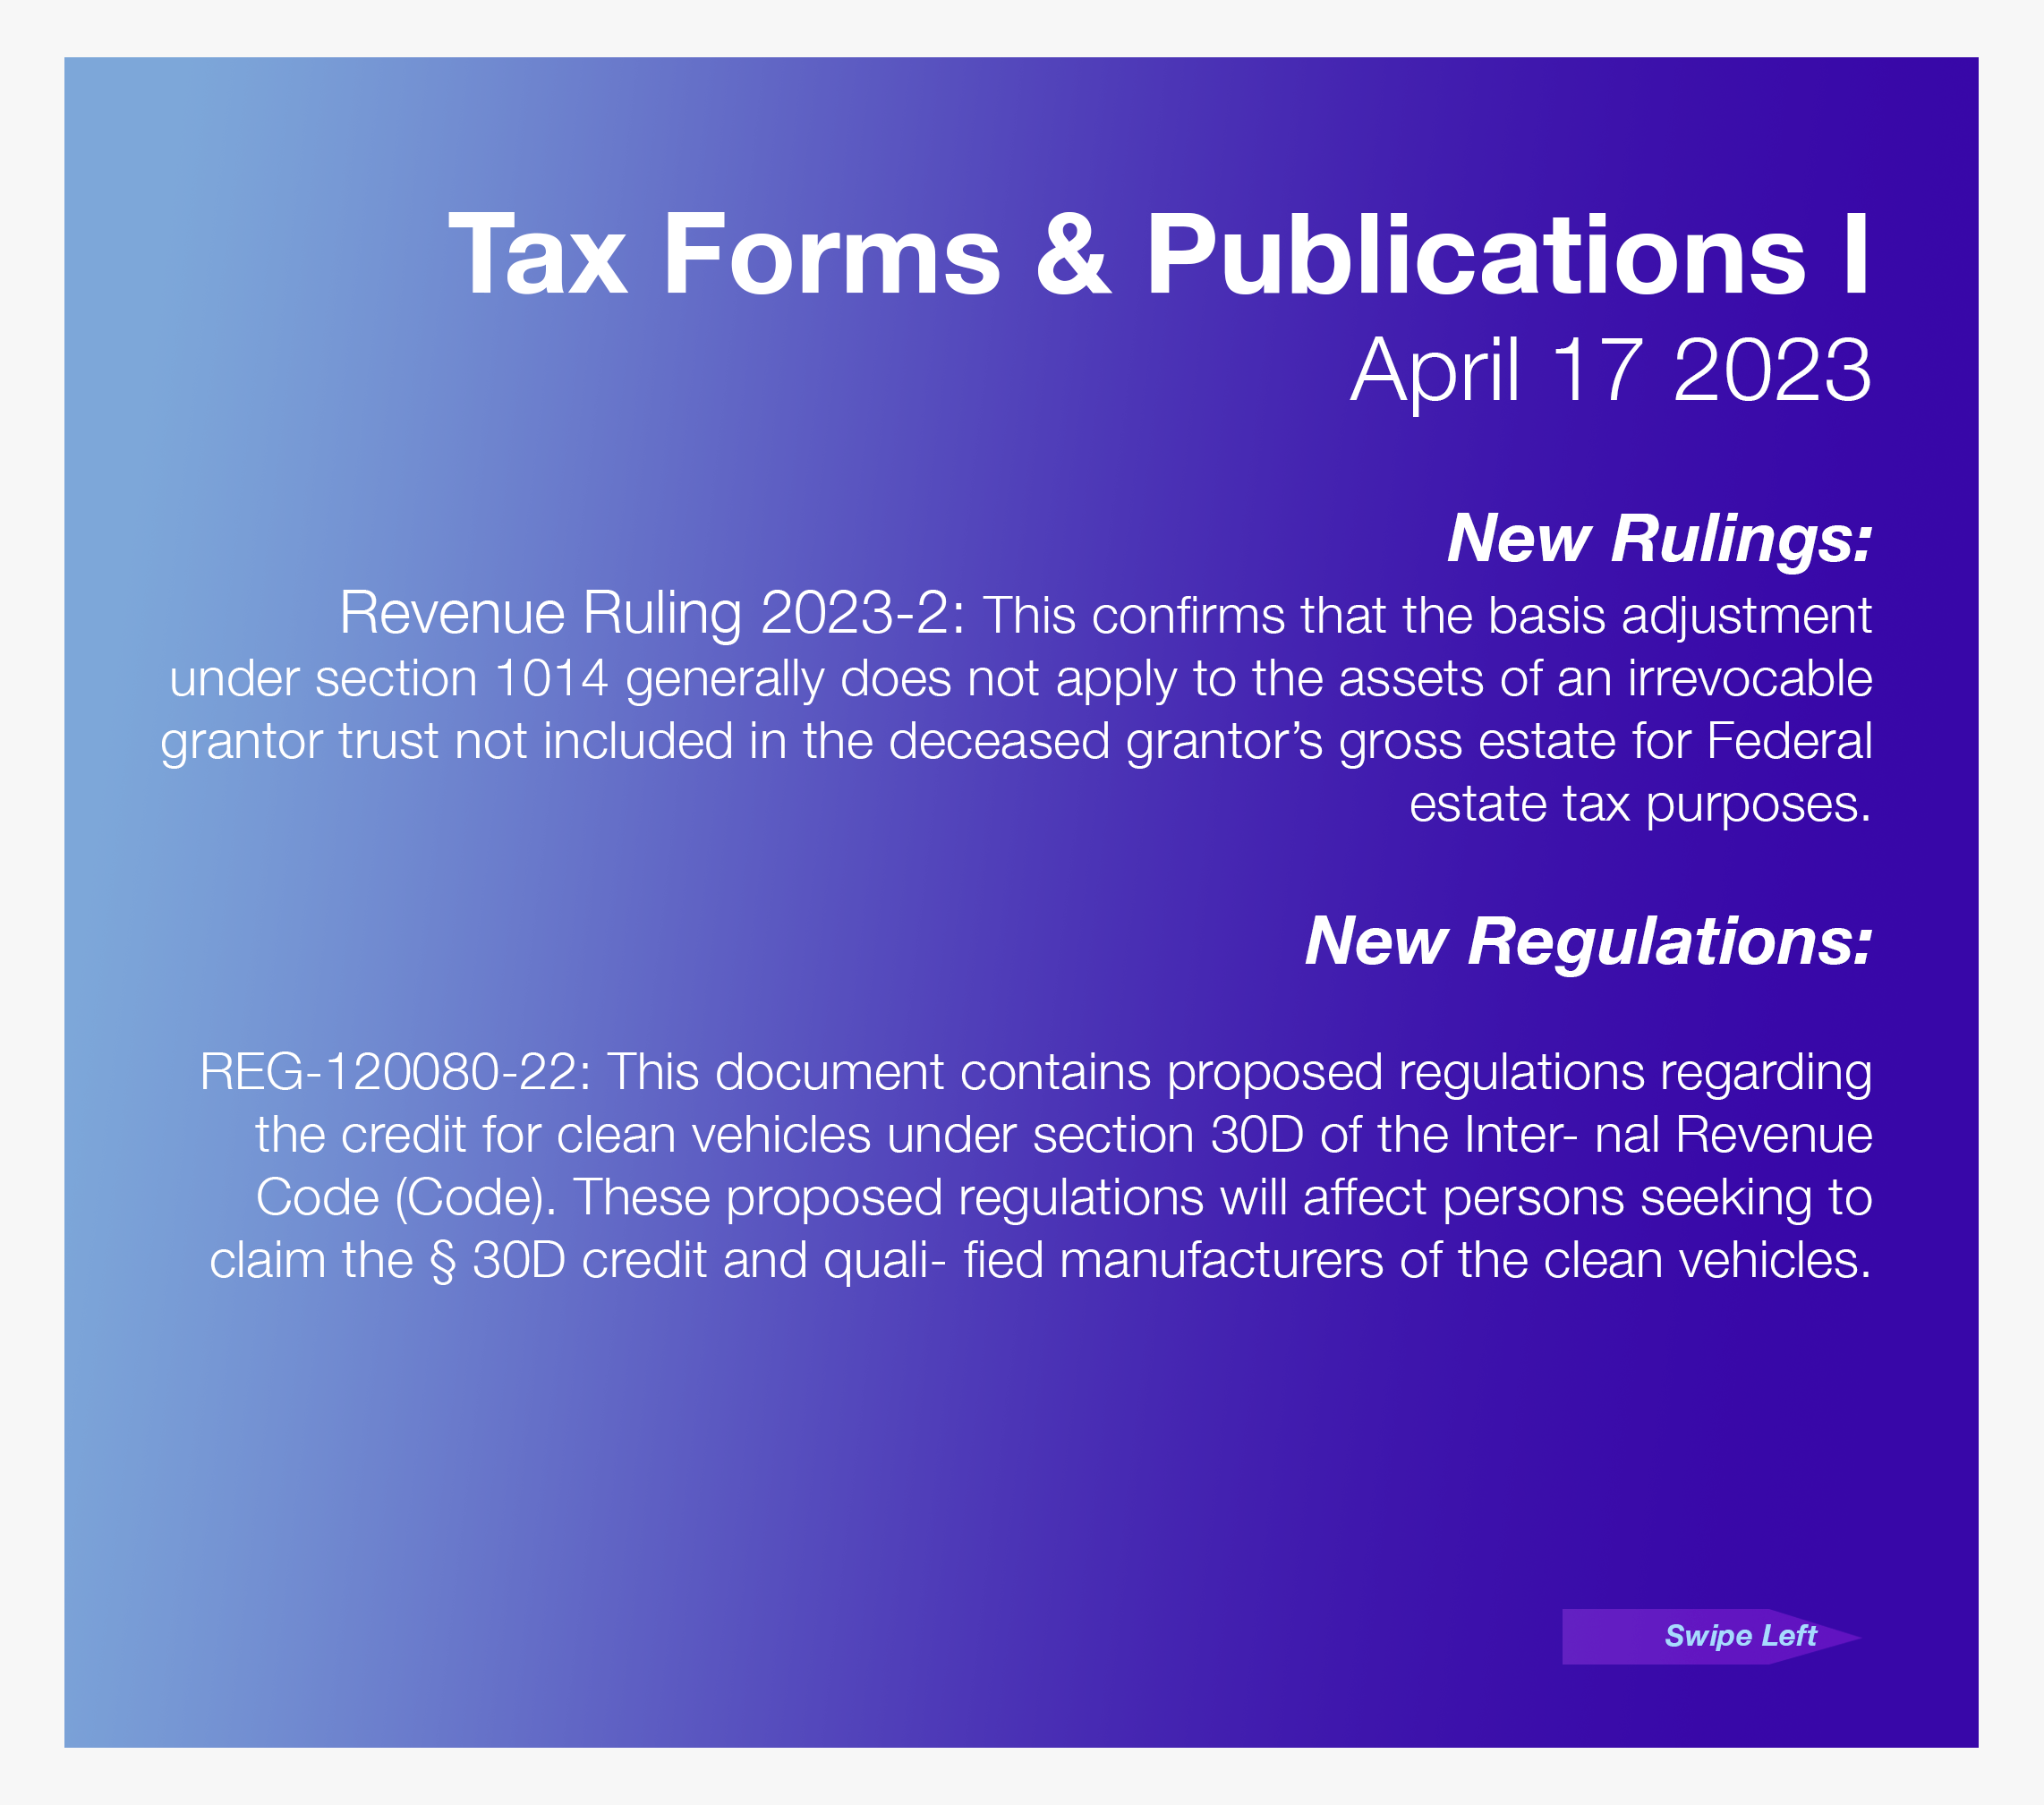 Tax Deadlines abril 2023 3.png